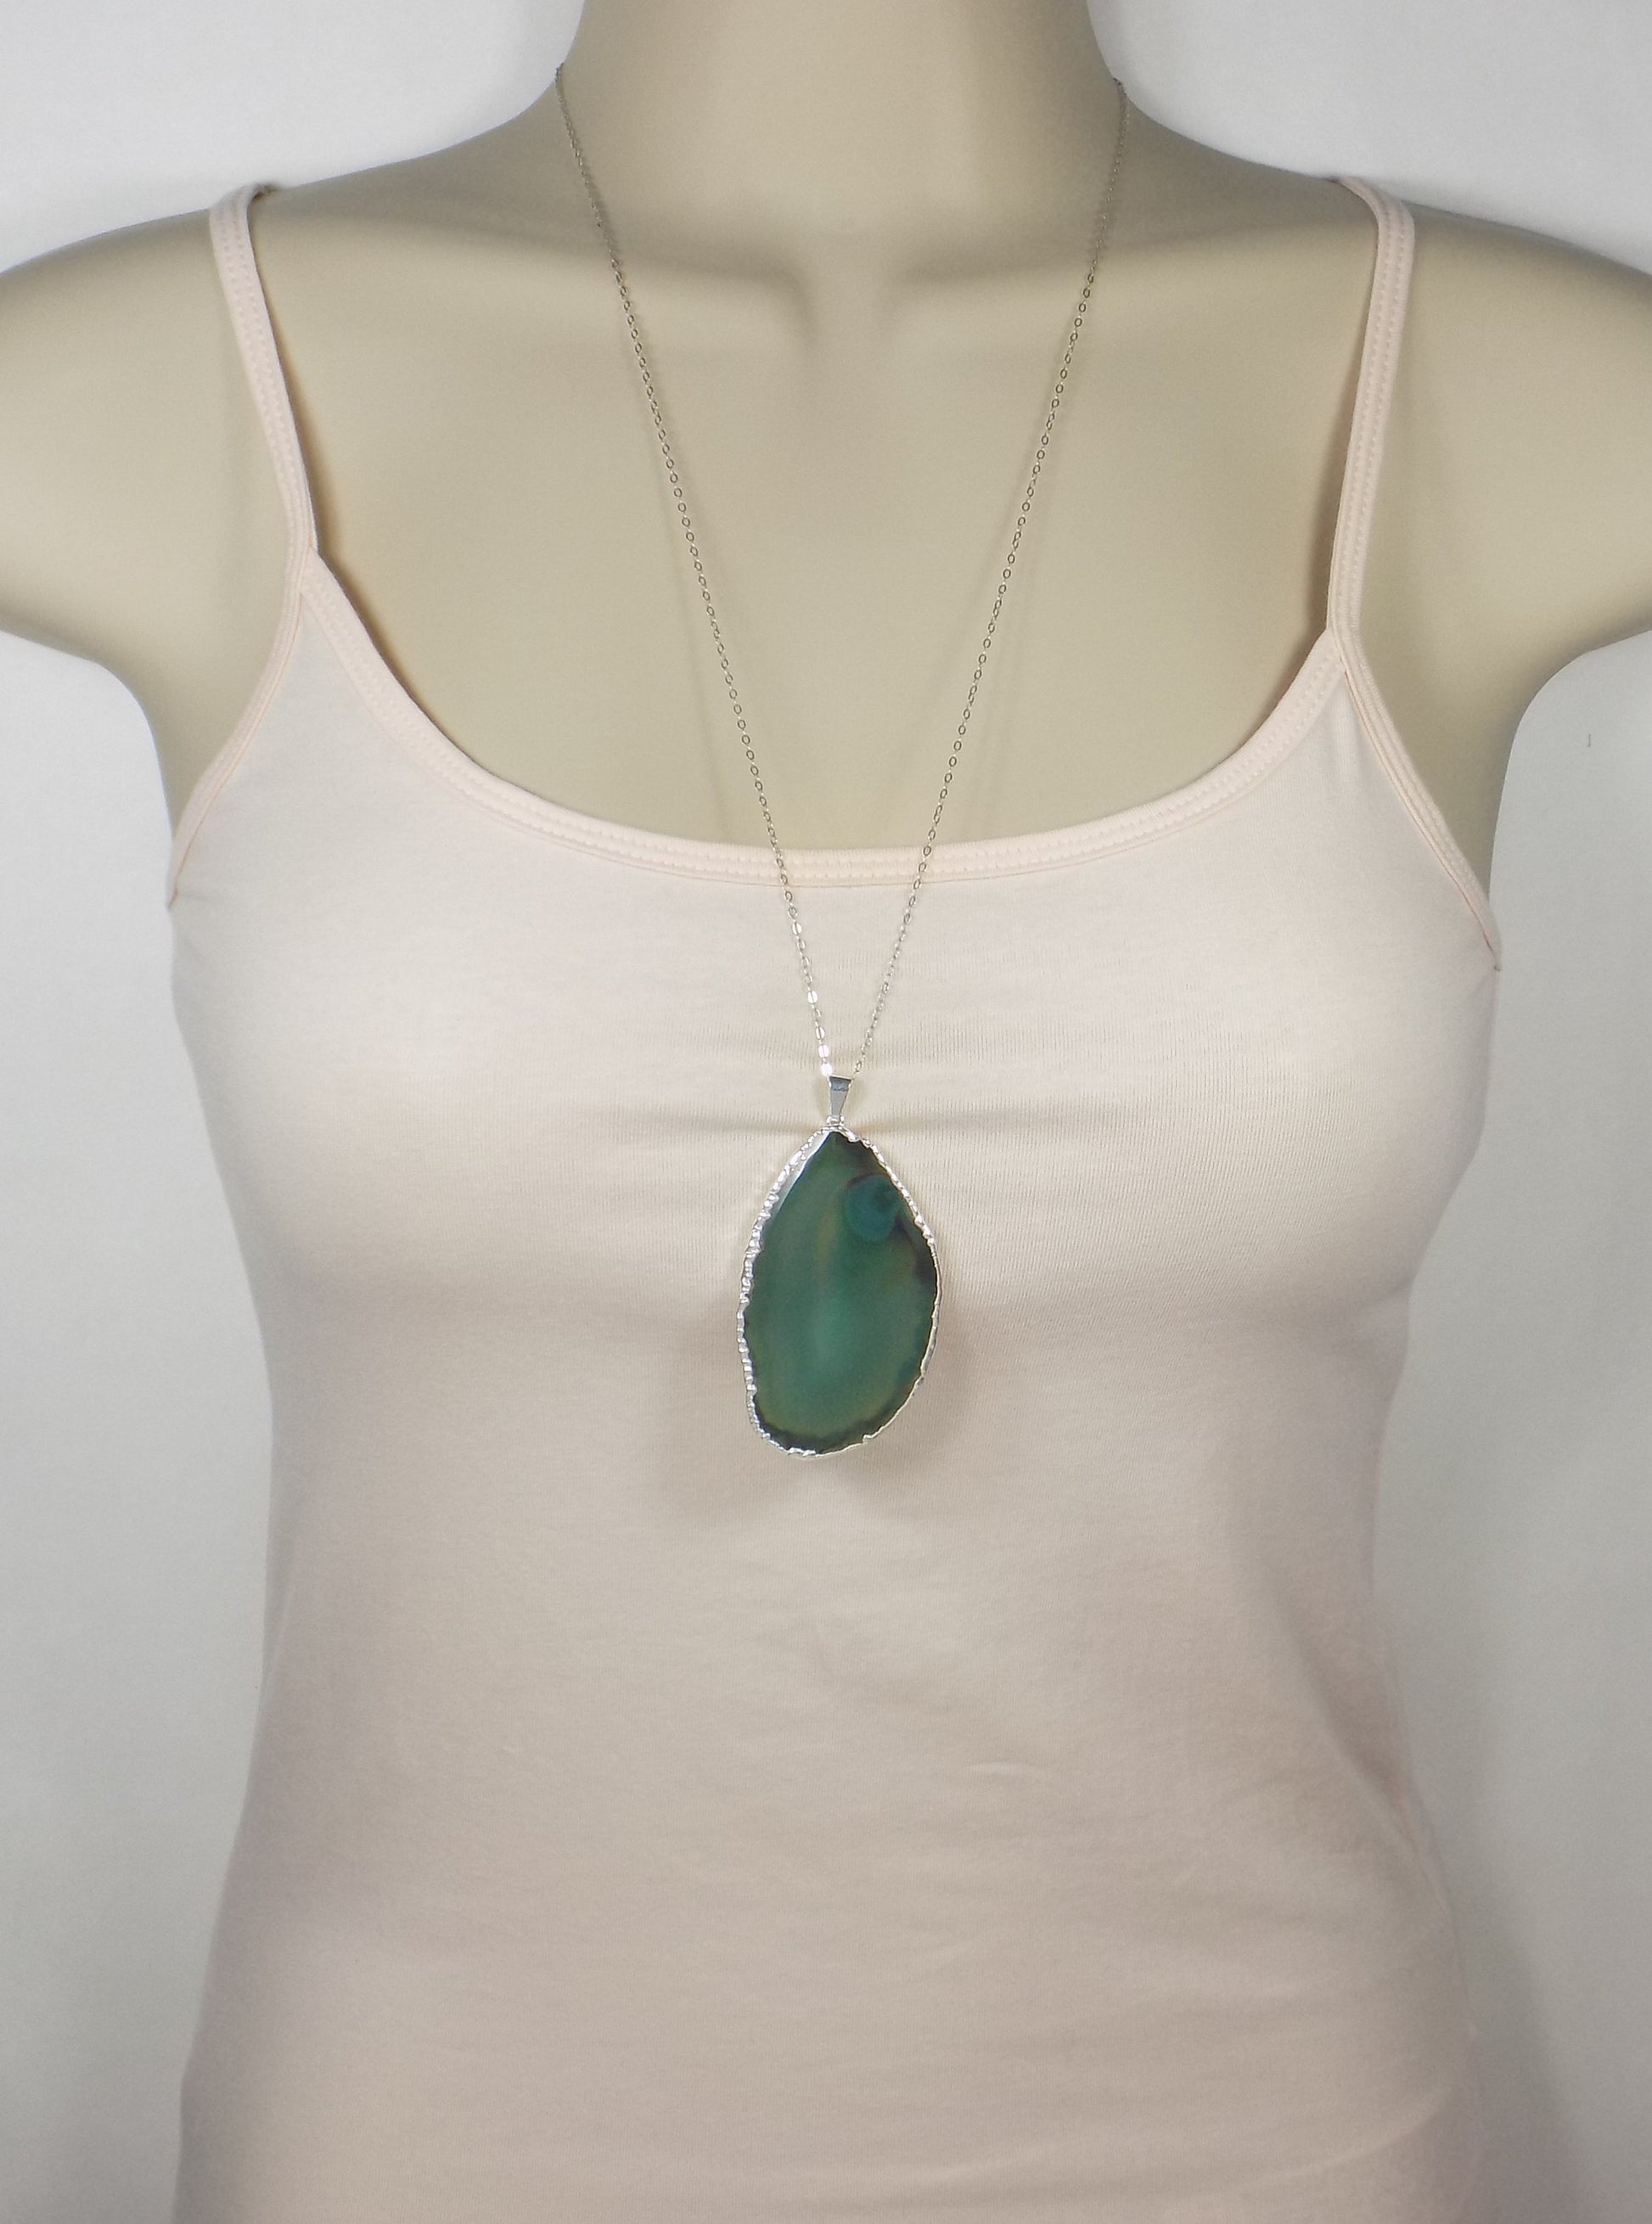 Agate Necklace Silver, Green Agate Pendant Necklace, Sliced Agate Statement Necklace, Boho Long Stone Necklace, Geode Necklace, G13-258